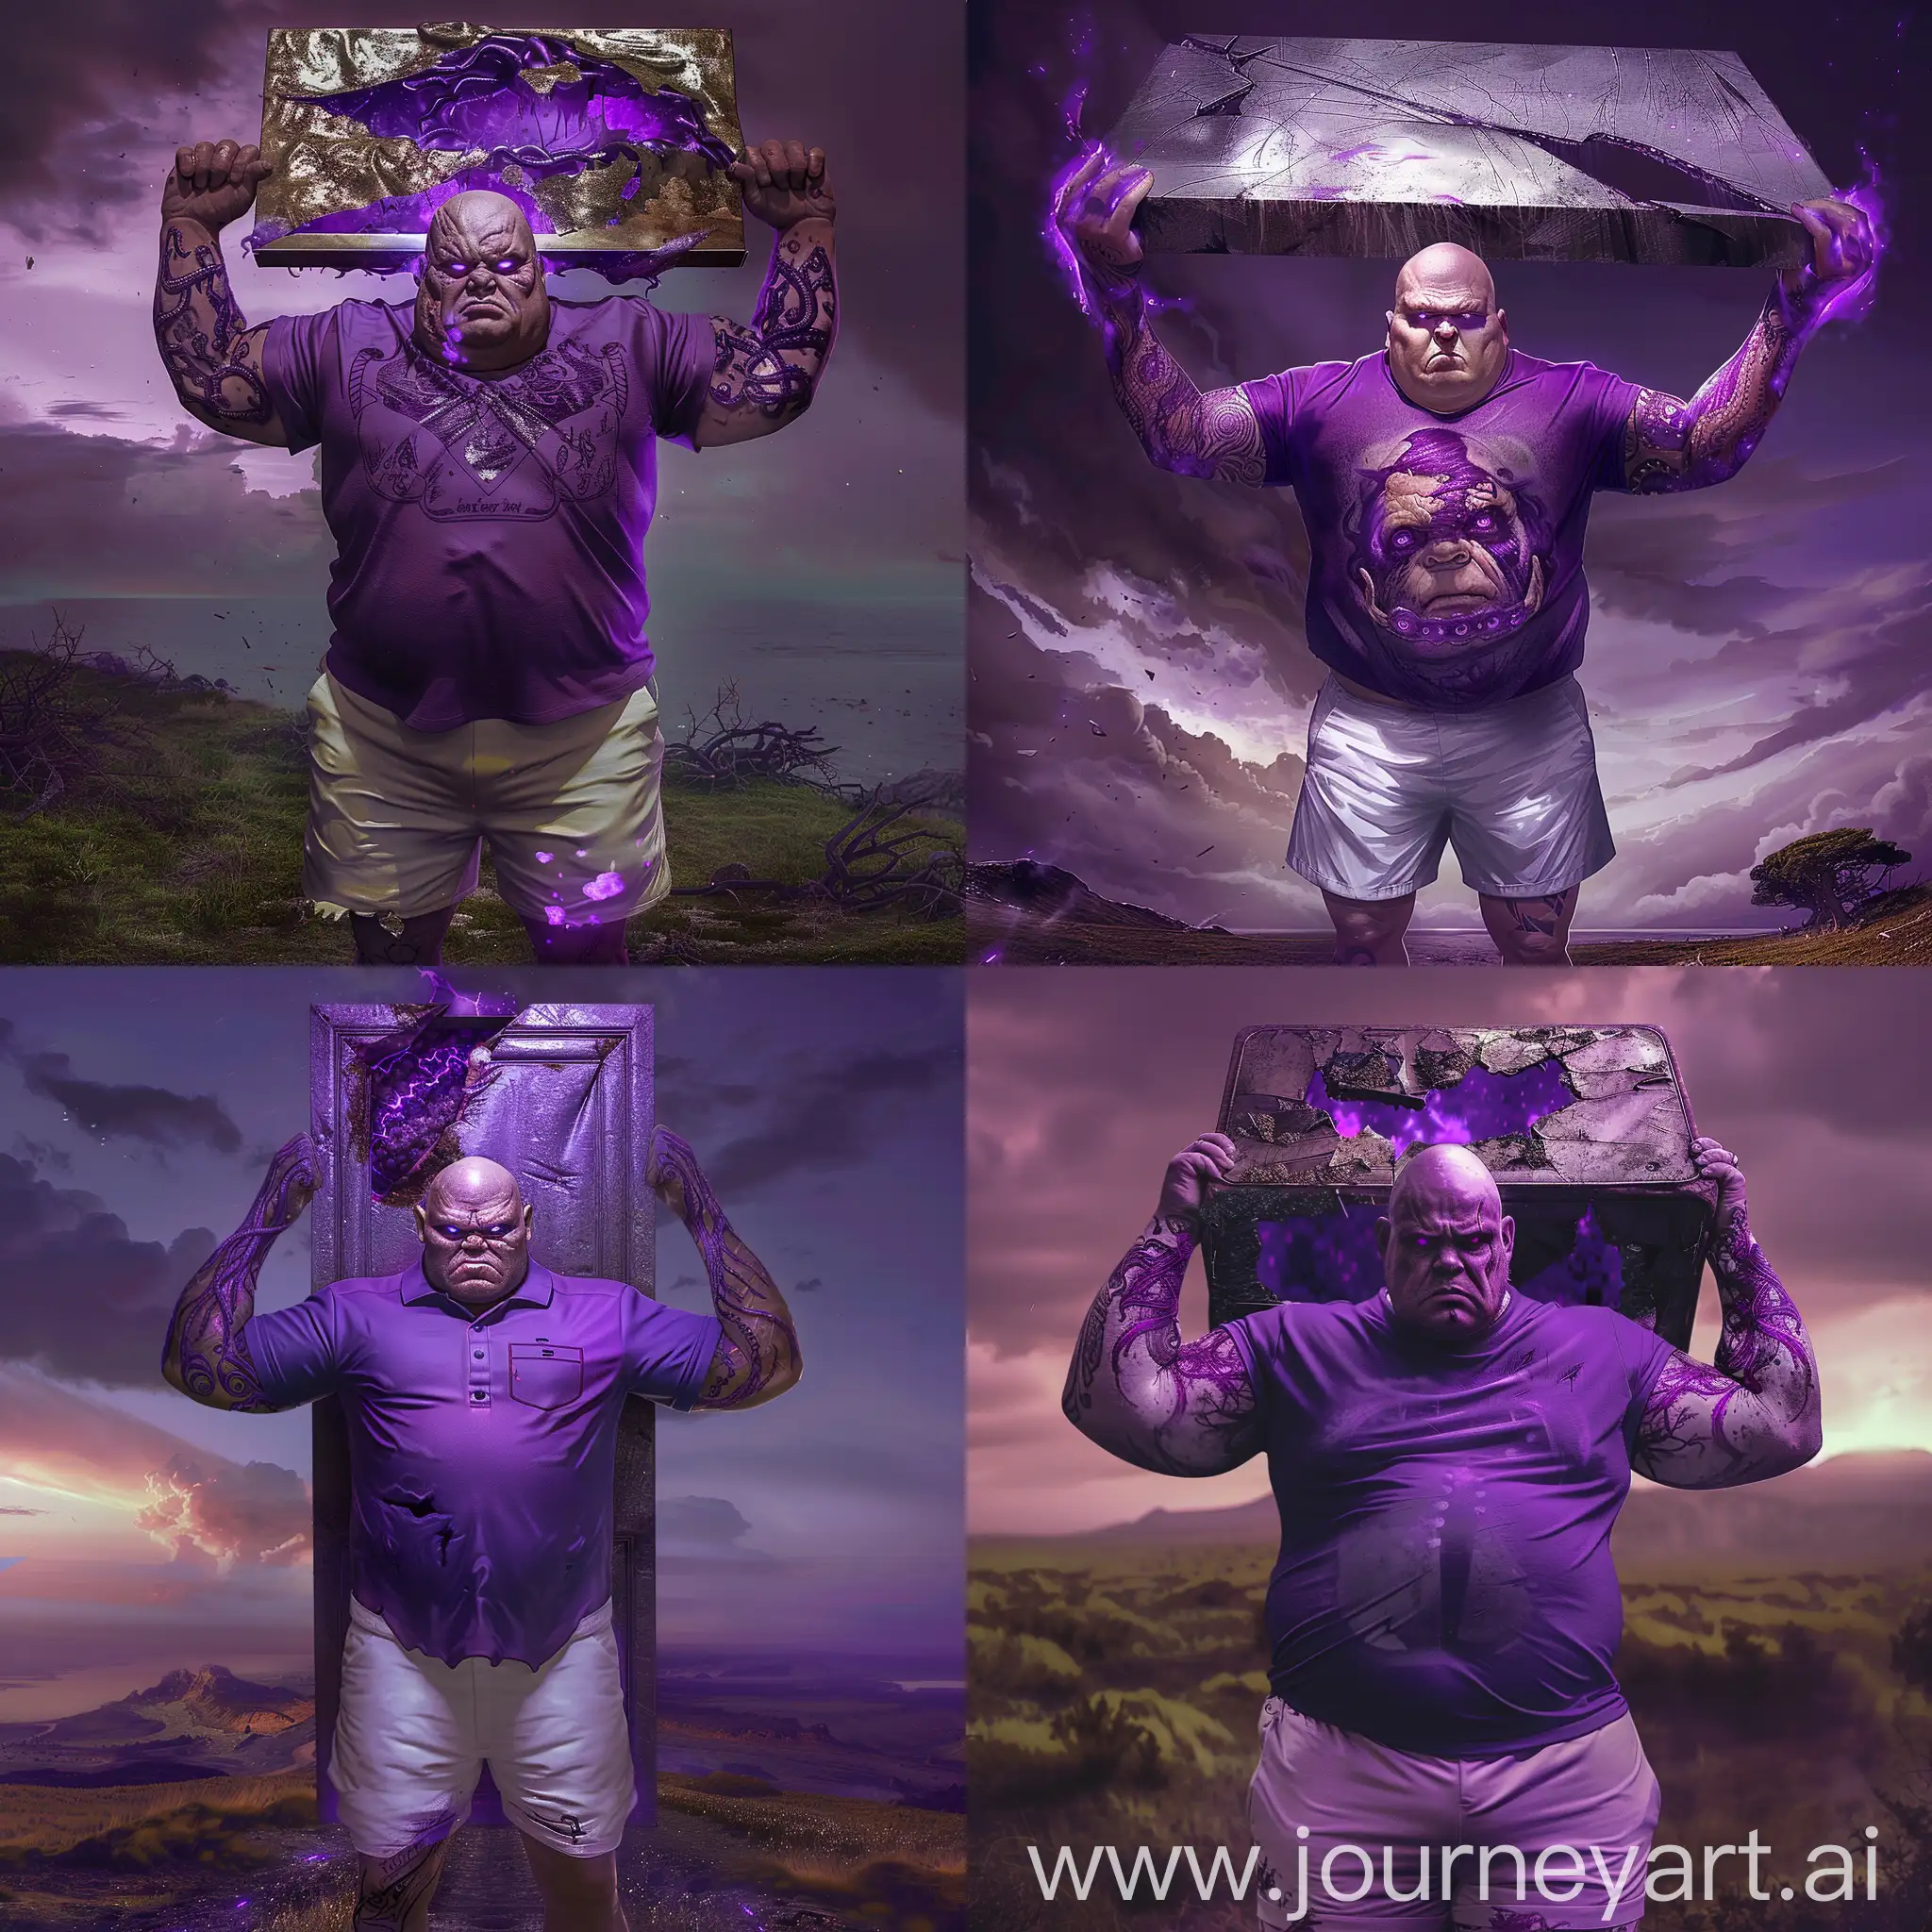 Intimidating-Strongman-with-Tentacle-Tattoos-Holds-Ripped-Metallic-Door-Against-Purple-Glow